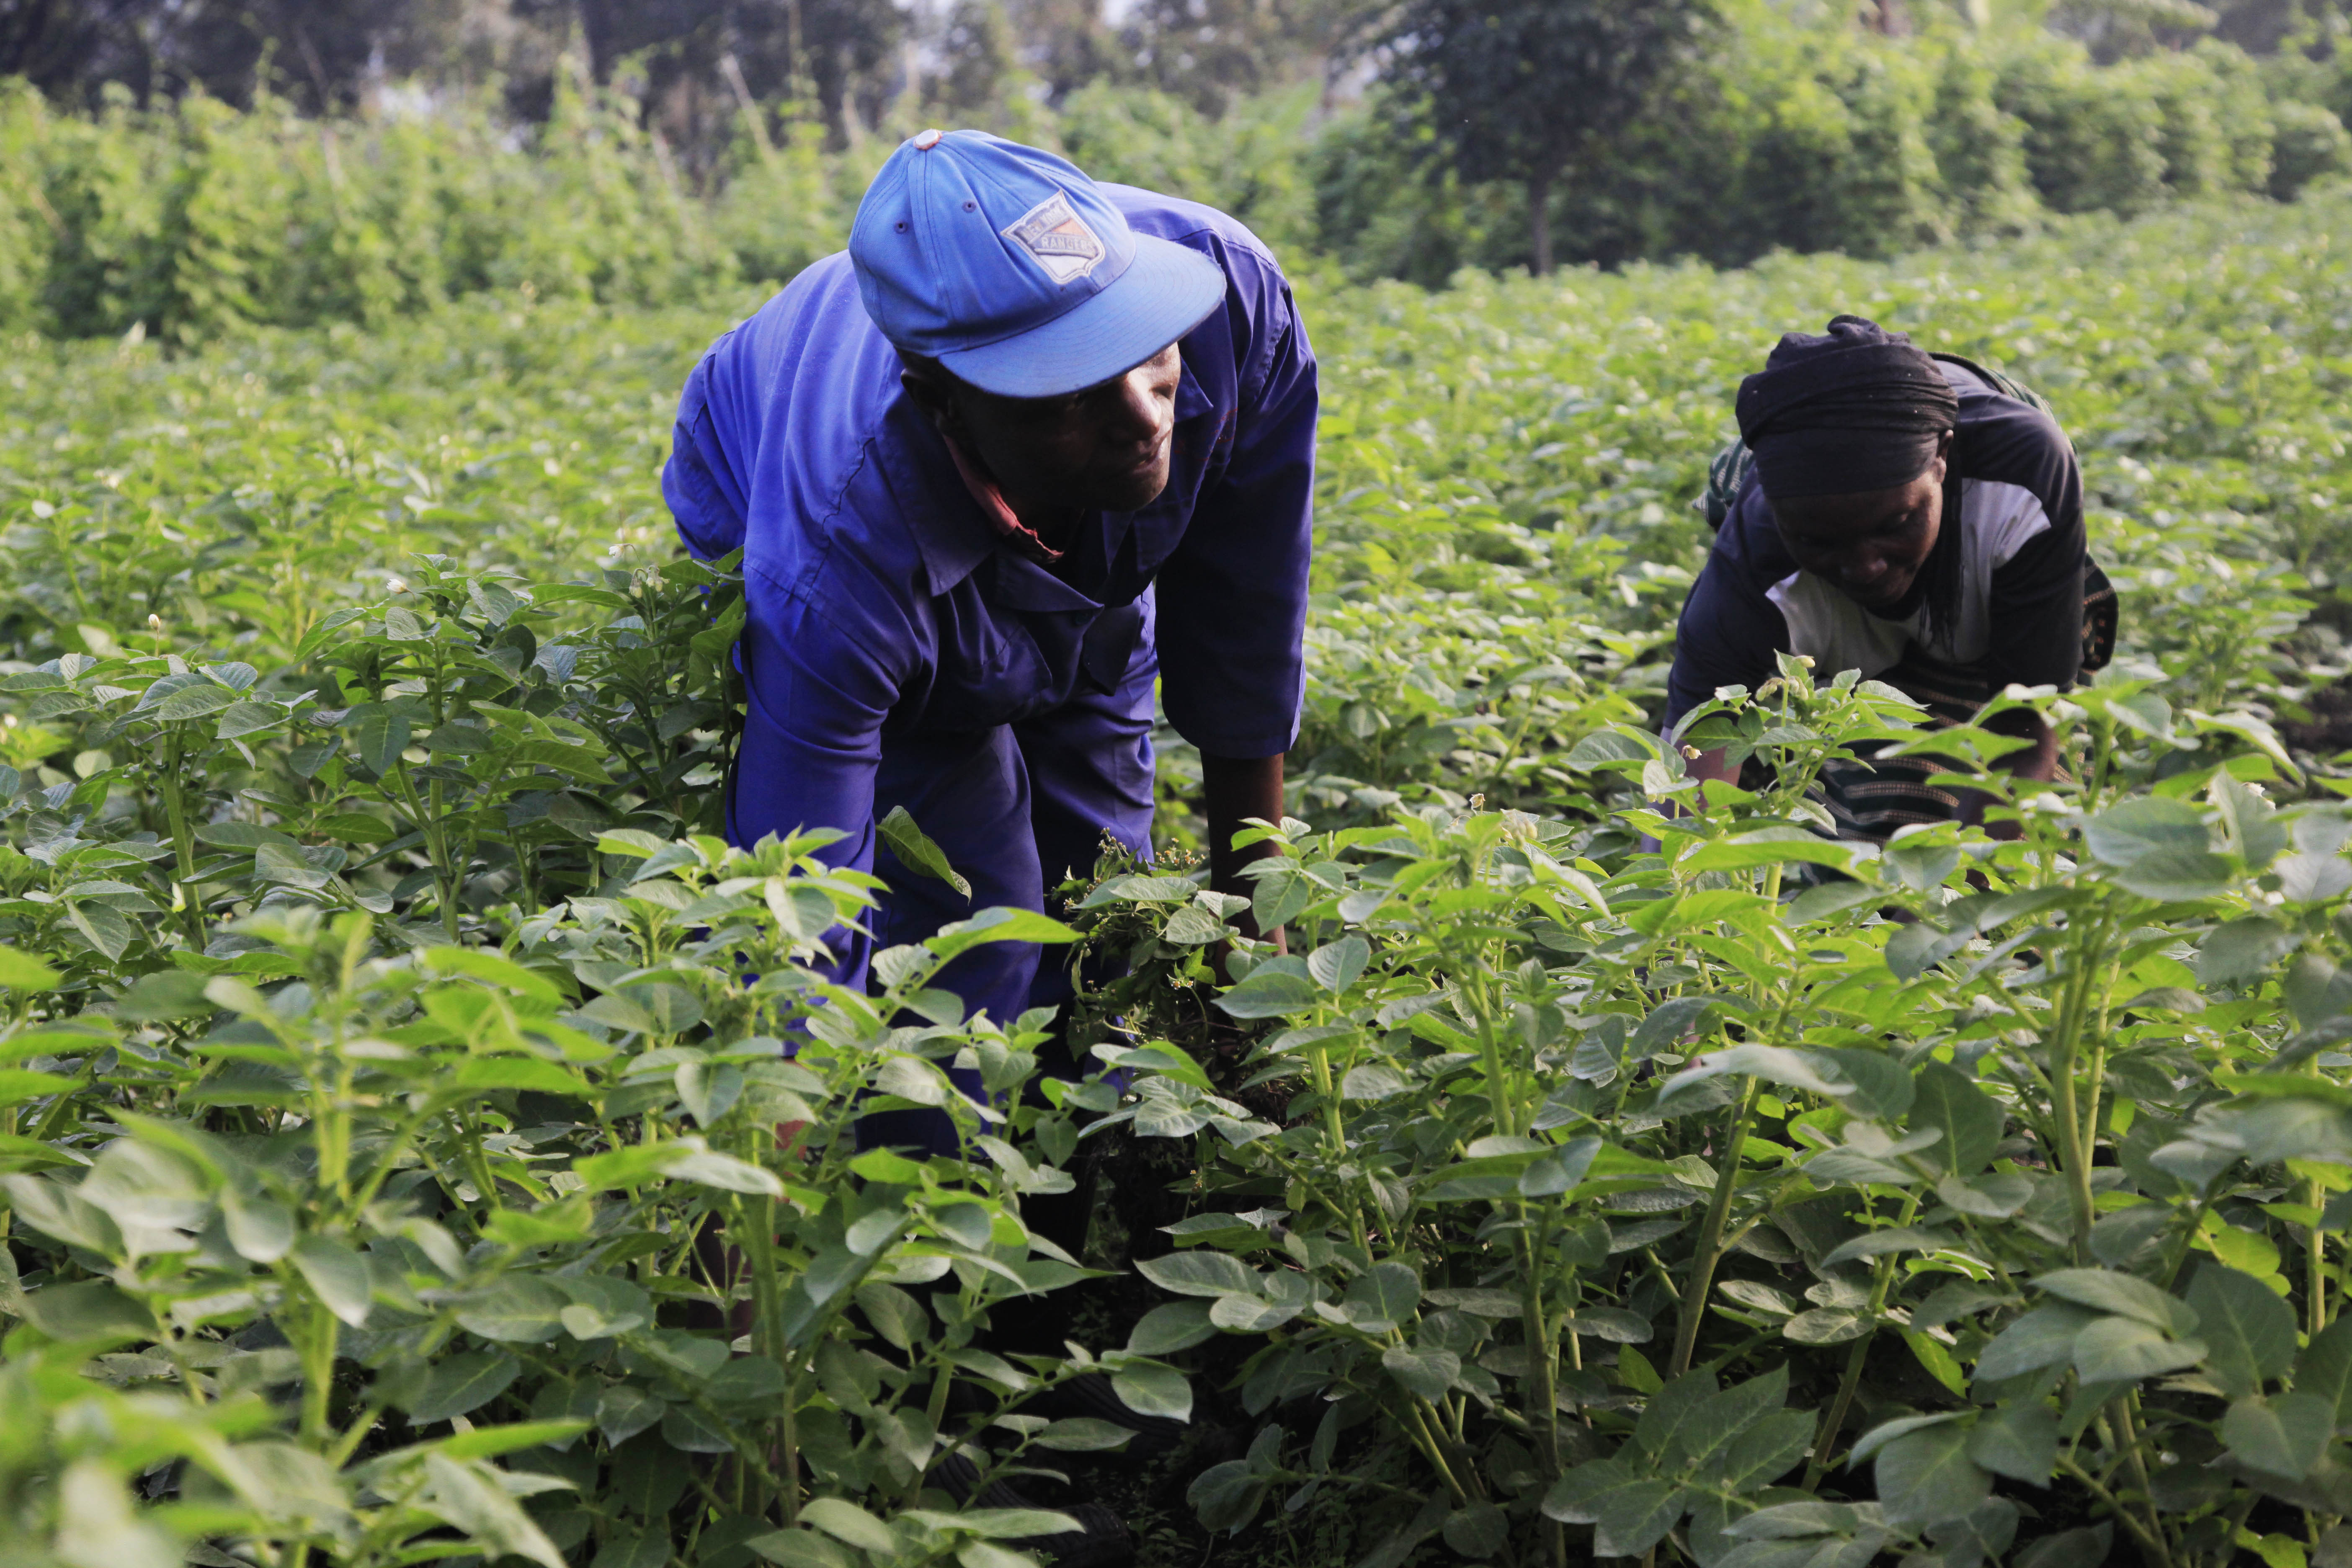 Farmers who are counting losses due to late blight disease welcome the plan to use agricultural biotechnology in developing a resistant crop variety. Photo: Sam Ngendahimana.